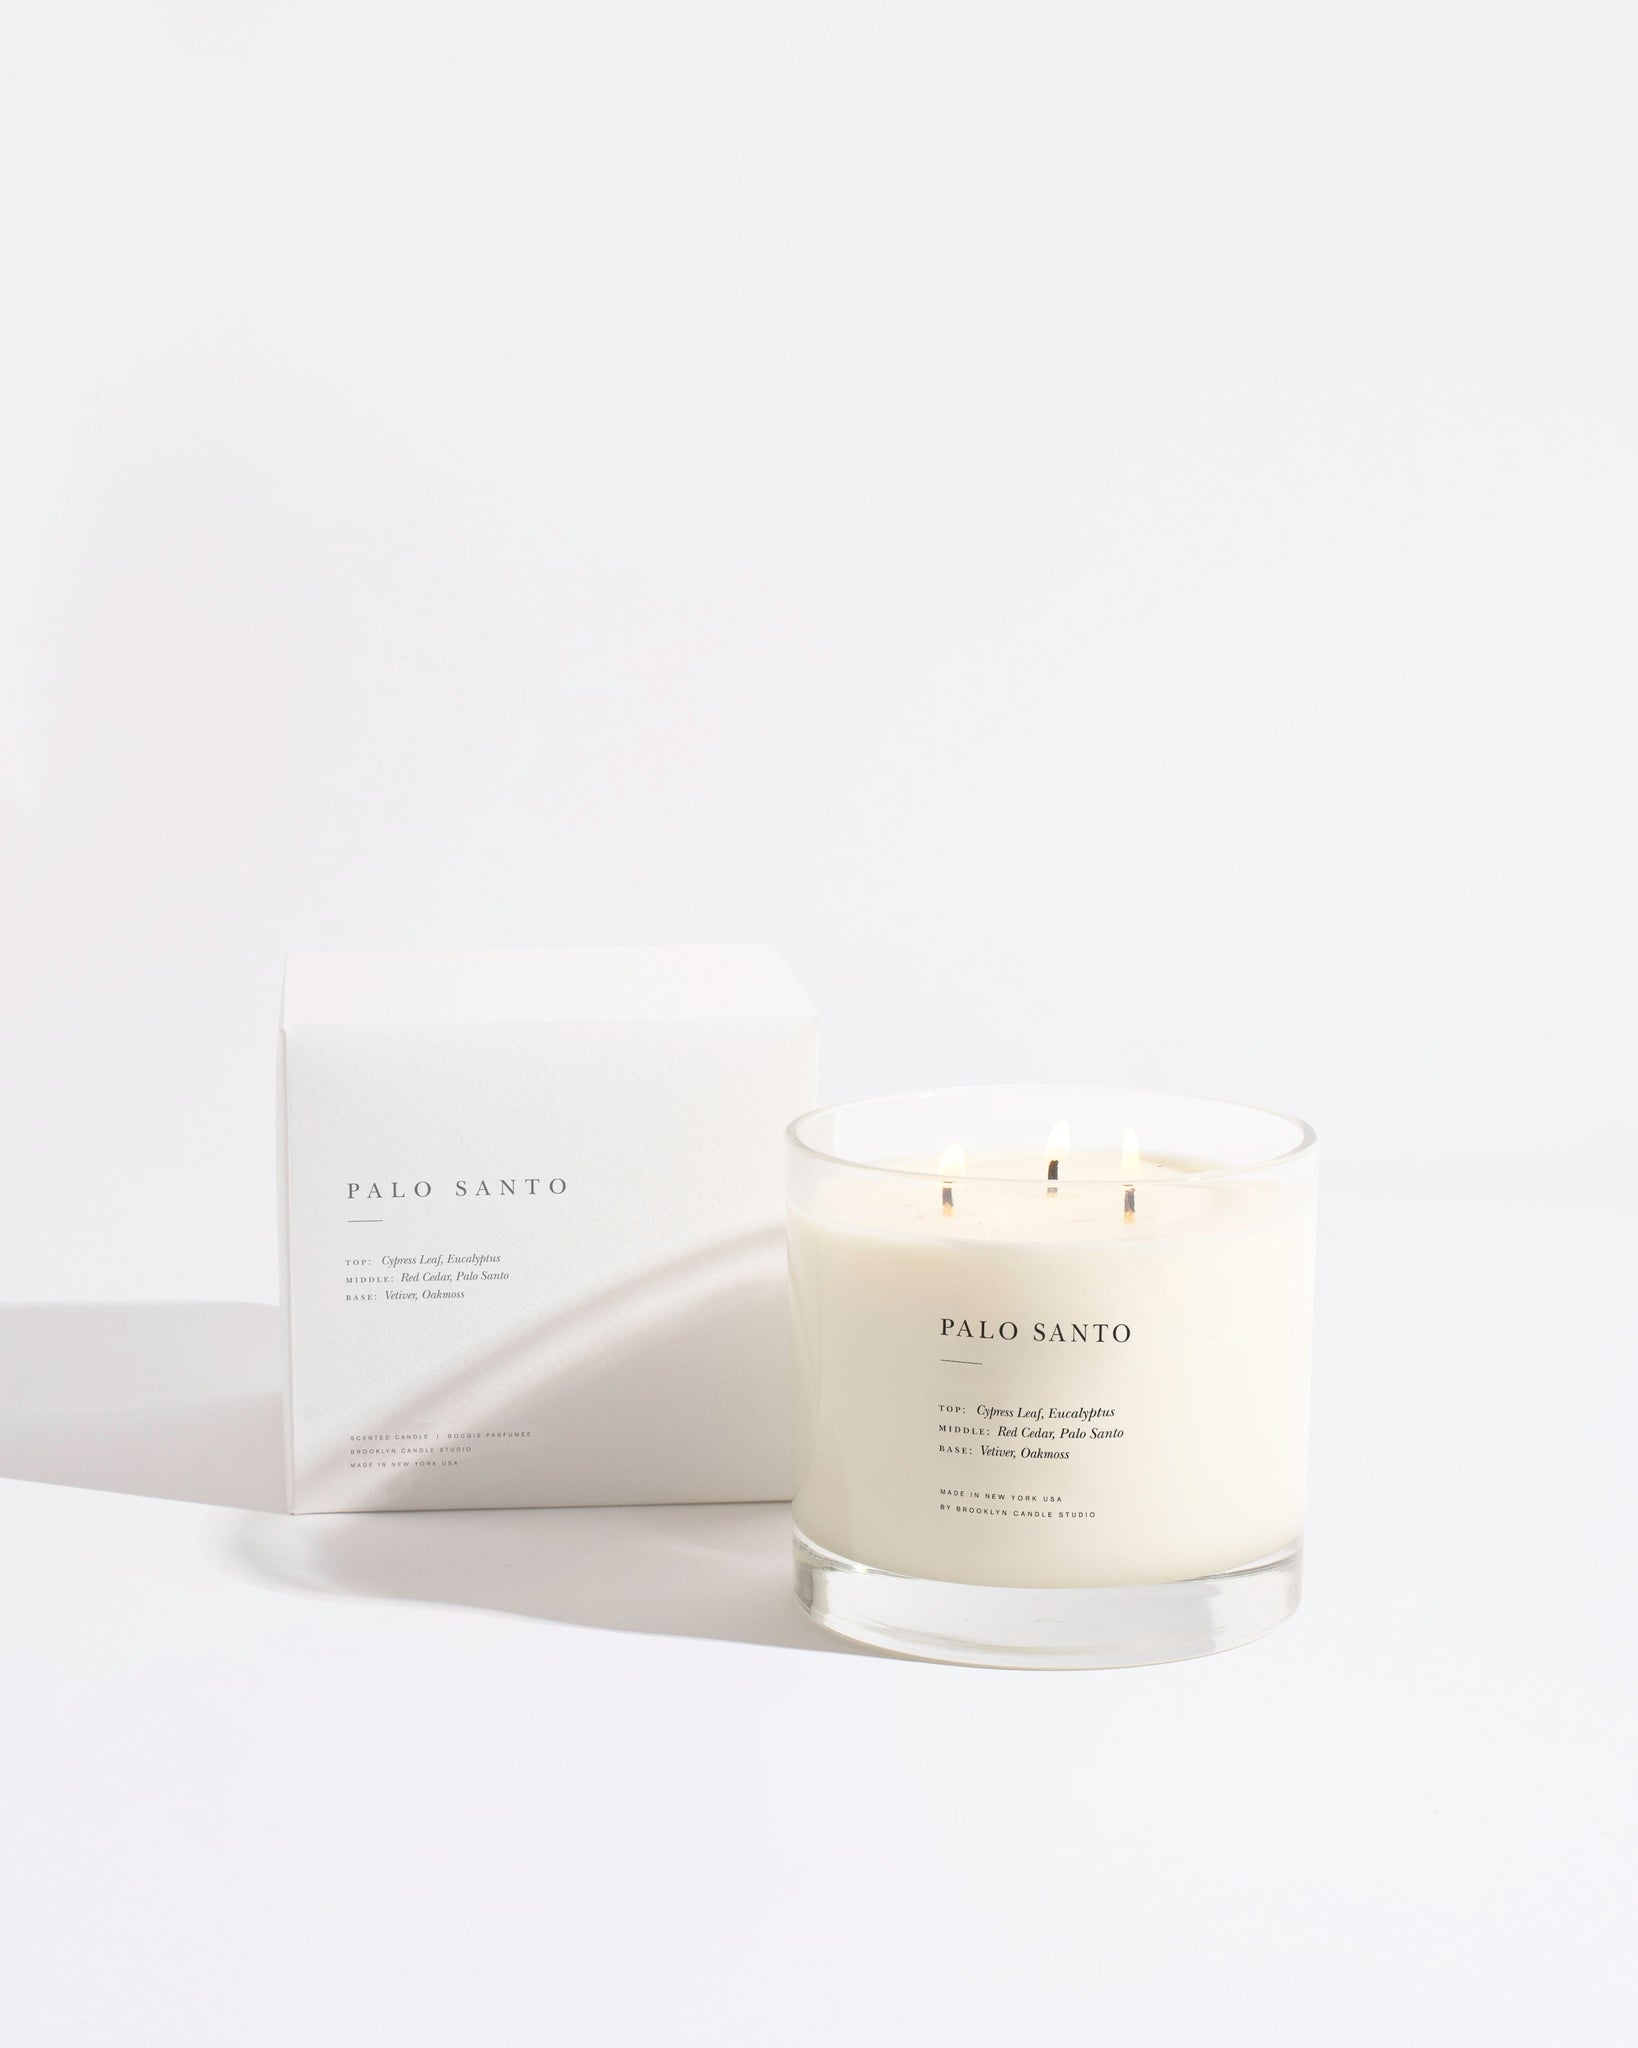 Palo Santo Maximalist 3-Wick Candle by Brooklyn Candle Studio